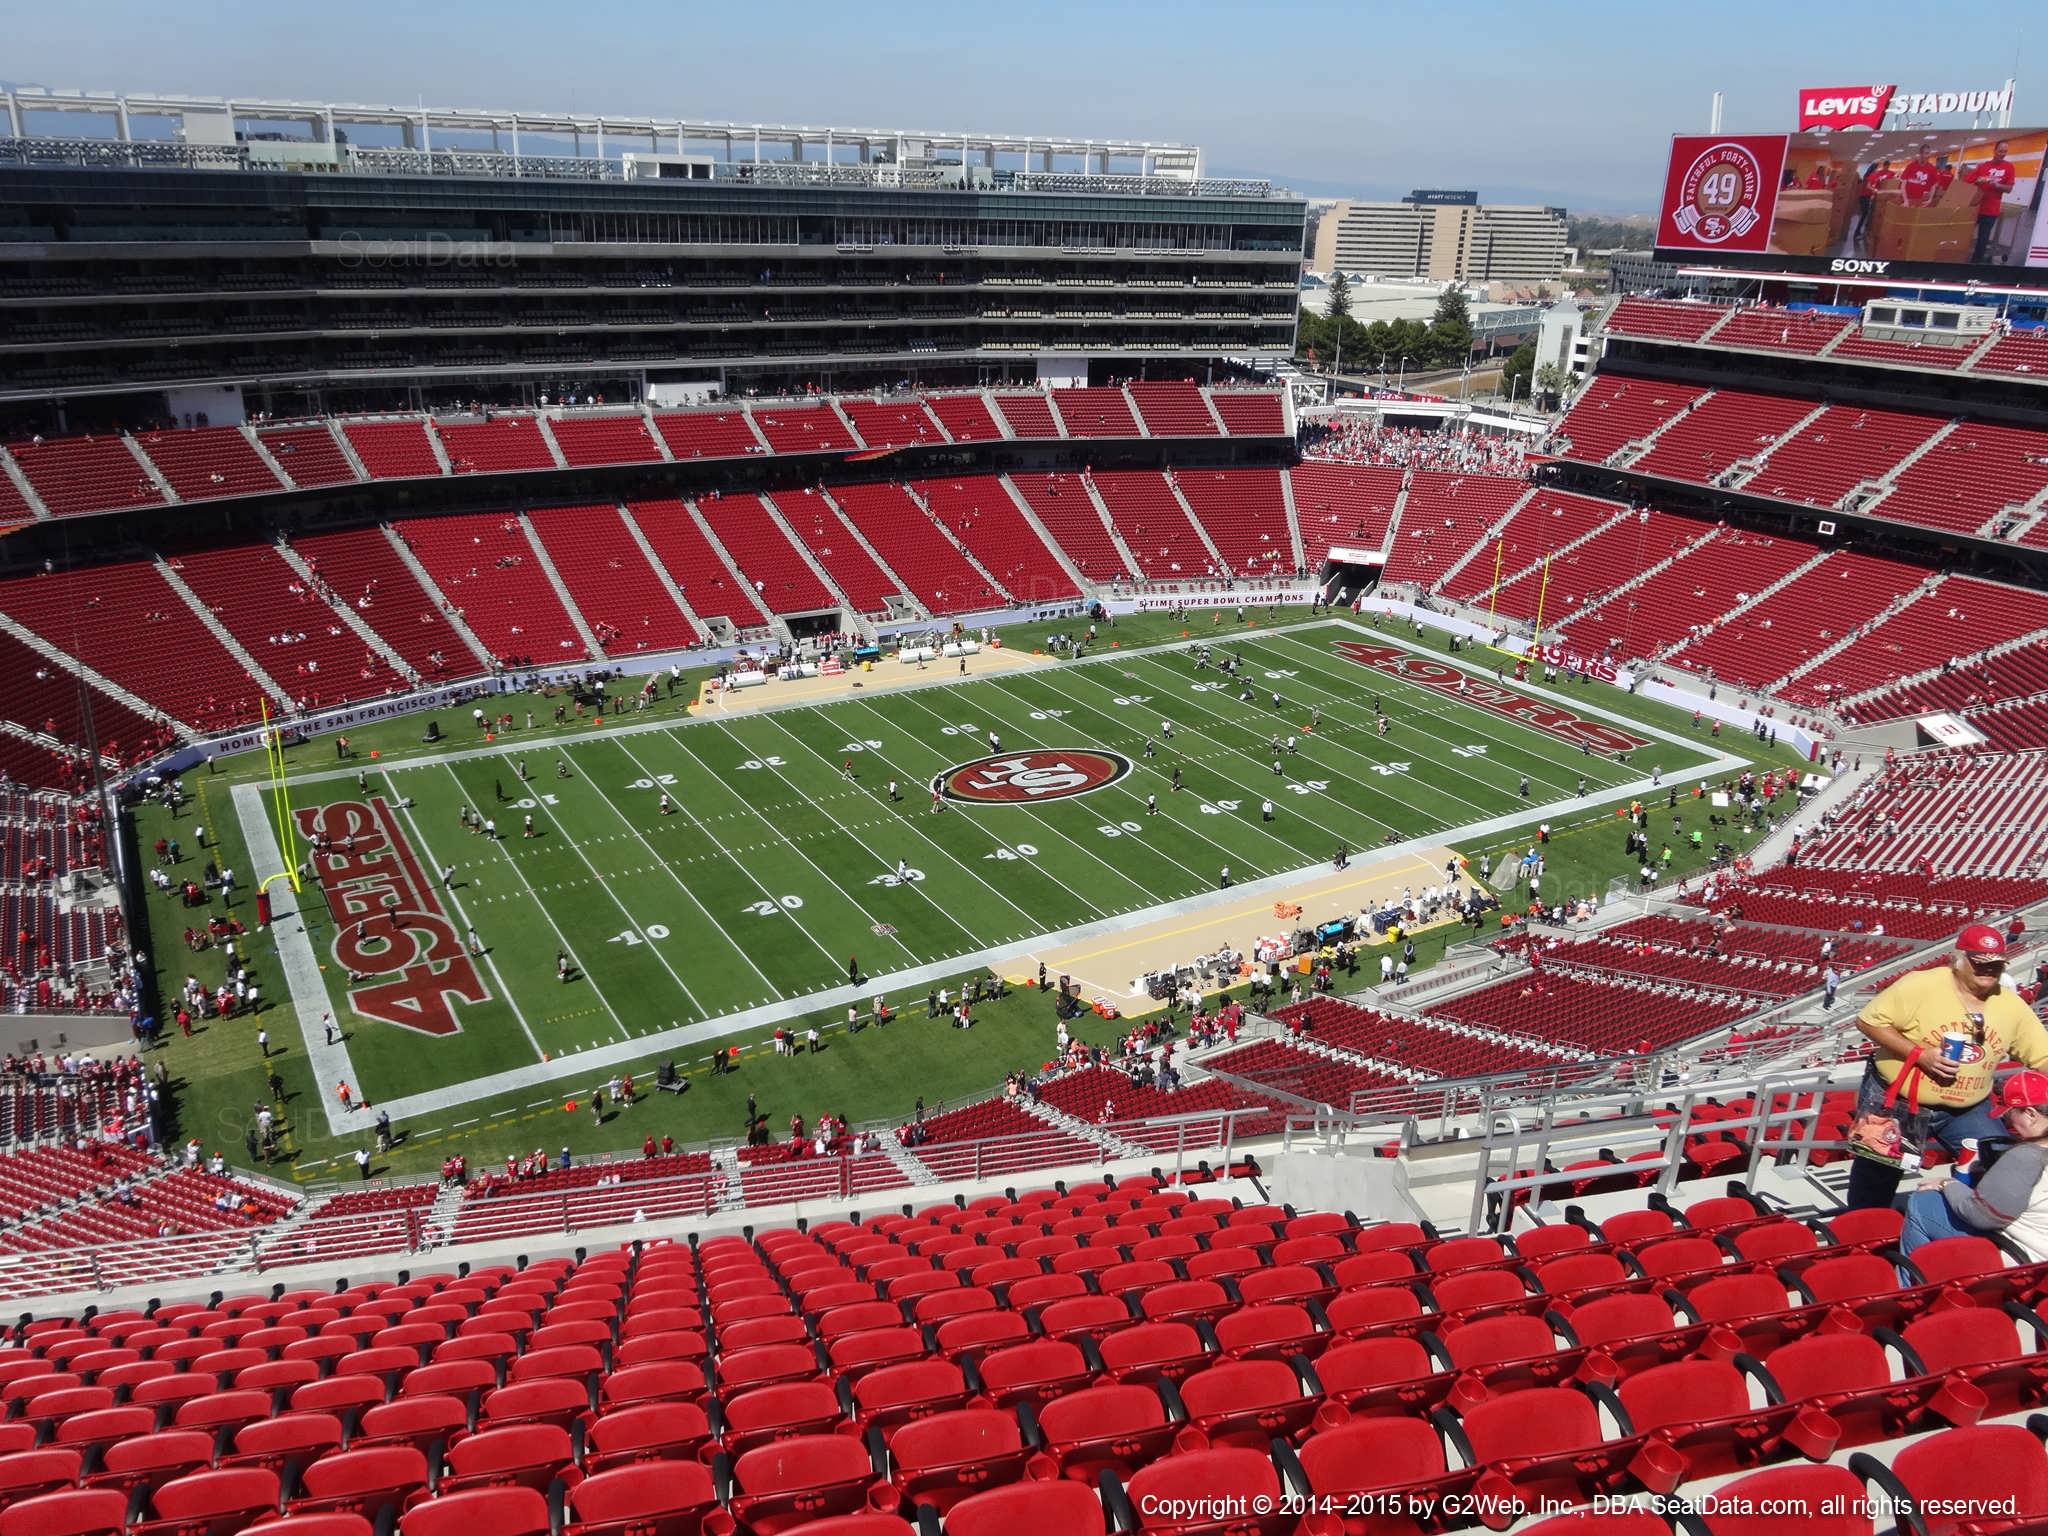 Seat view from section 416 at Levi’s Stadium, home of the San Francisco 49ers